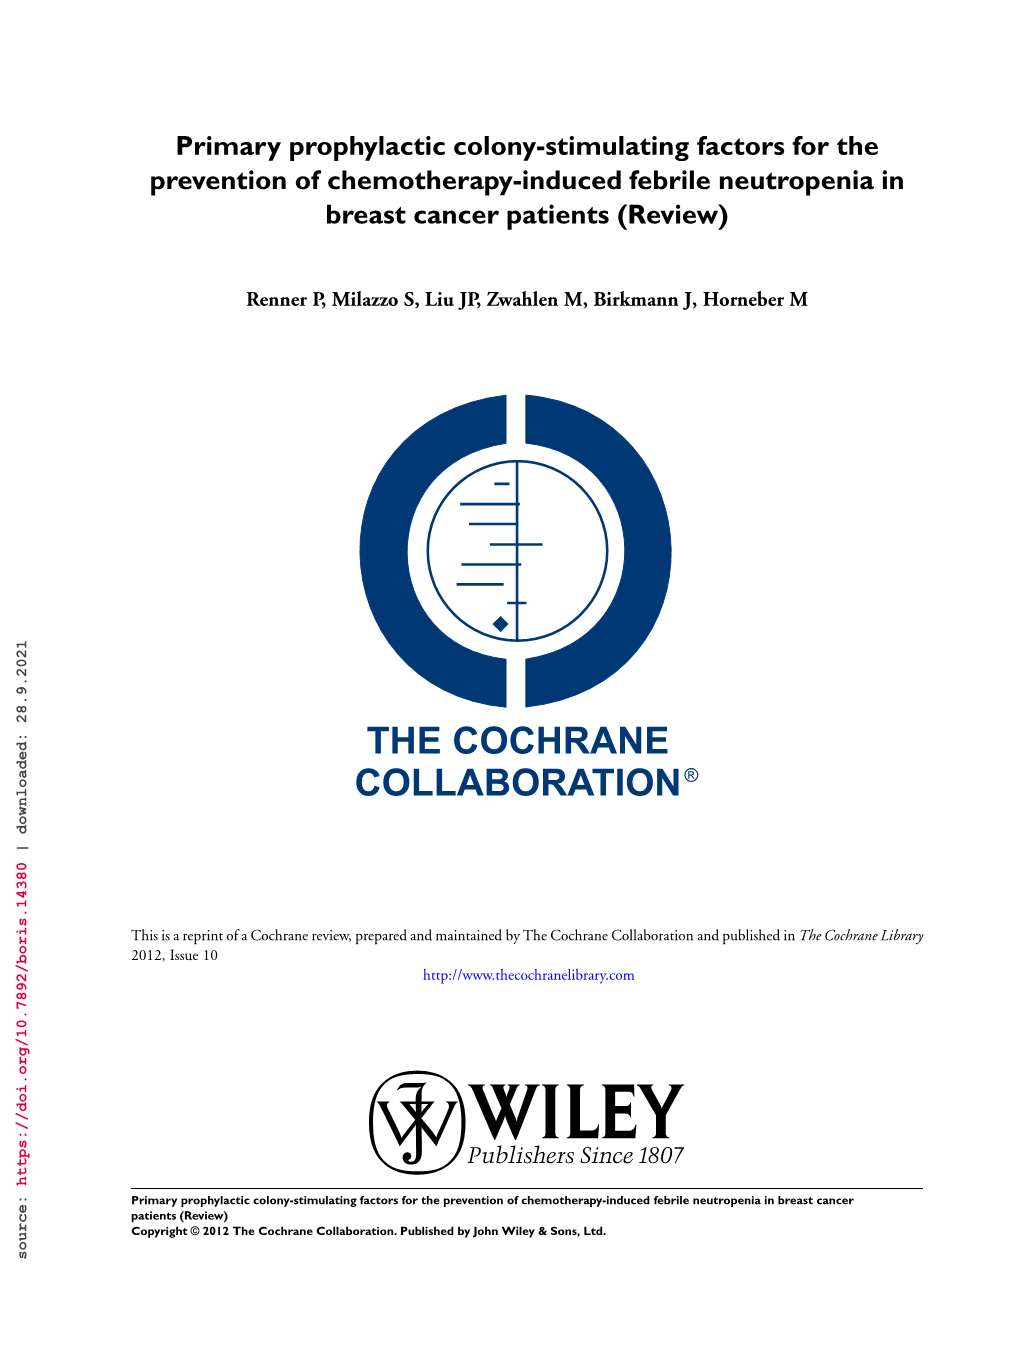 Primary Prophylactic Colony-Stimulating Factors for the Prevention of Chemotherapy-Induced Febrile Neutropenia in Breast Cancer